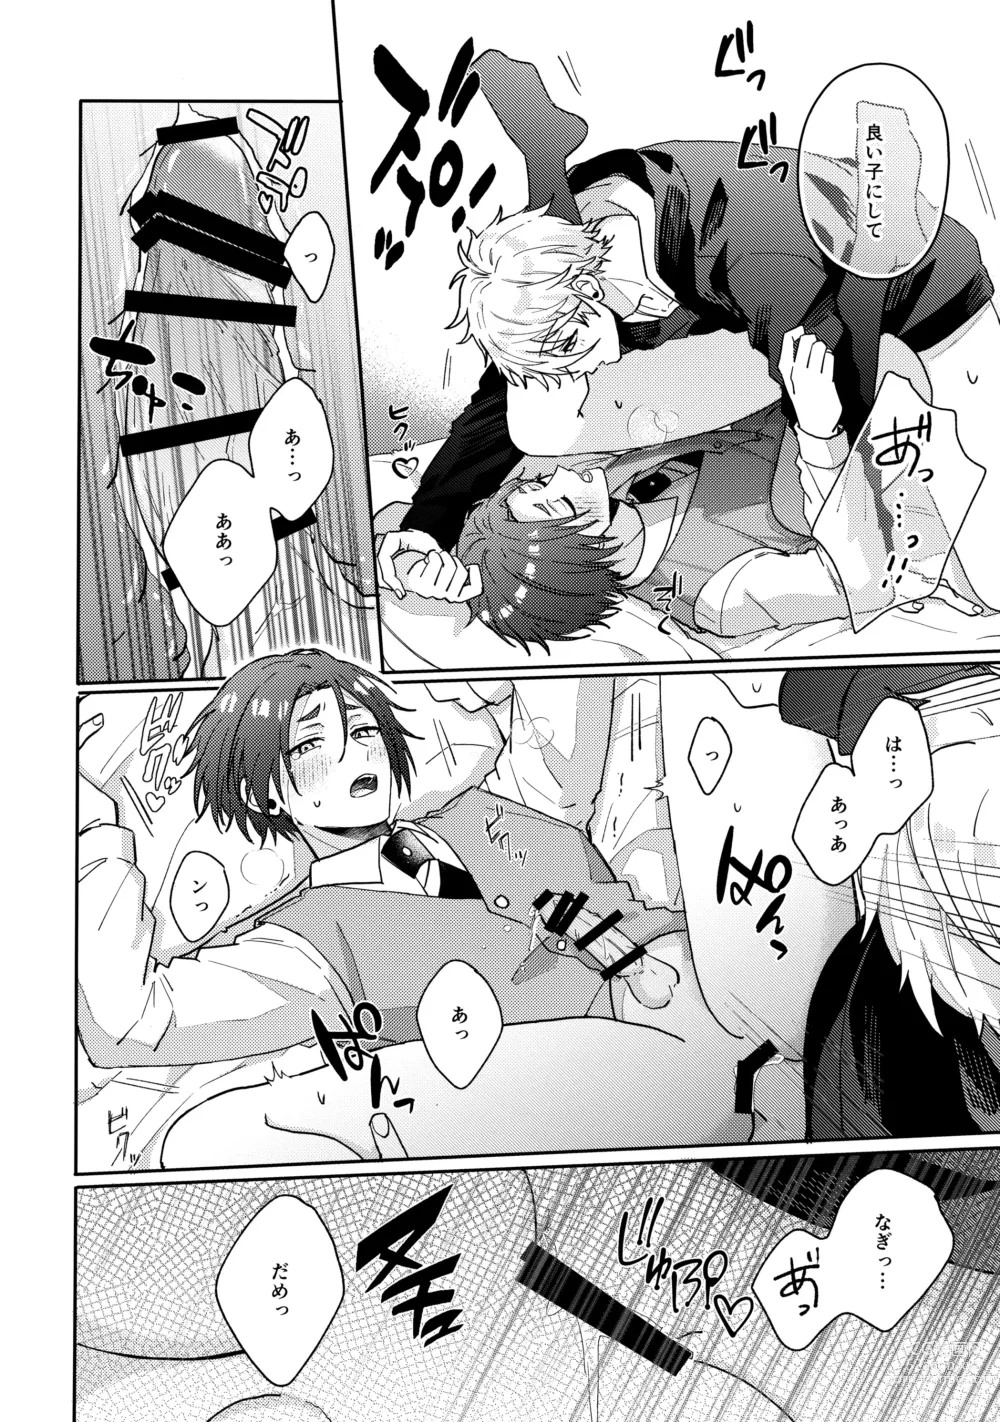 Page 51 of doujinshi my precious one